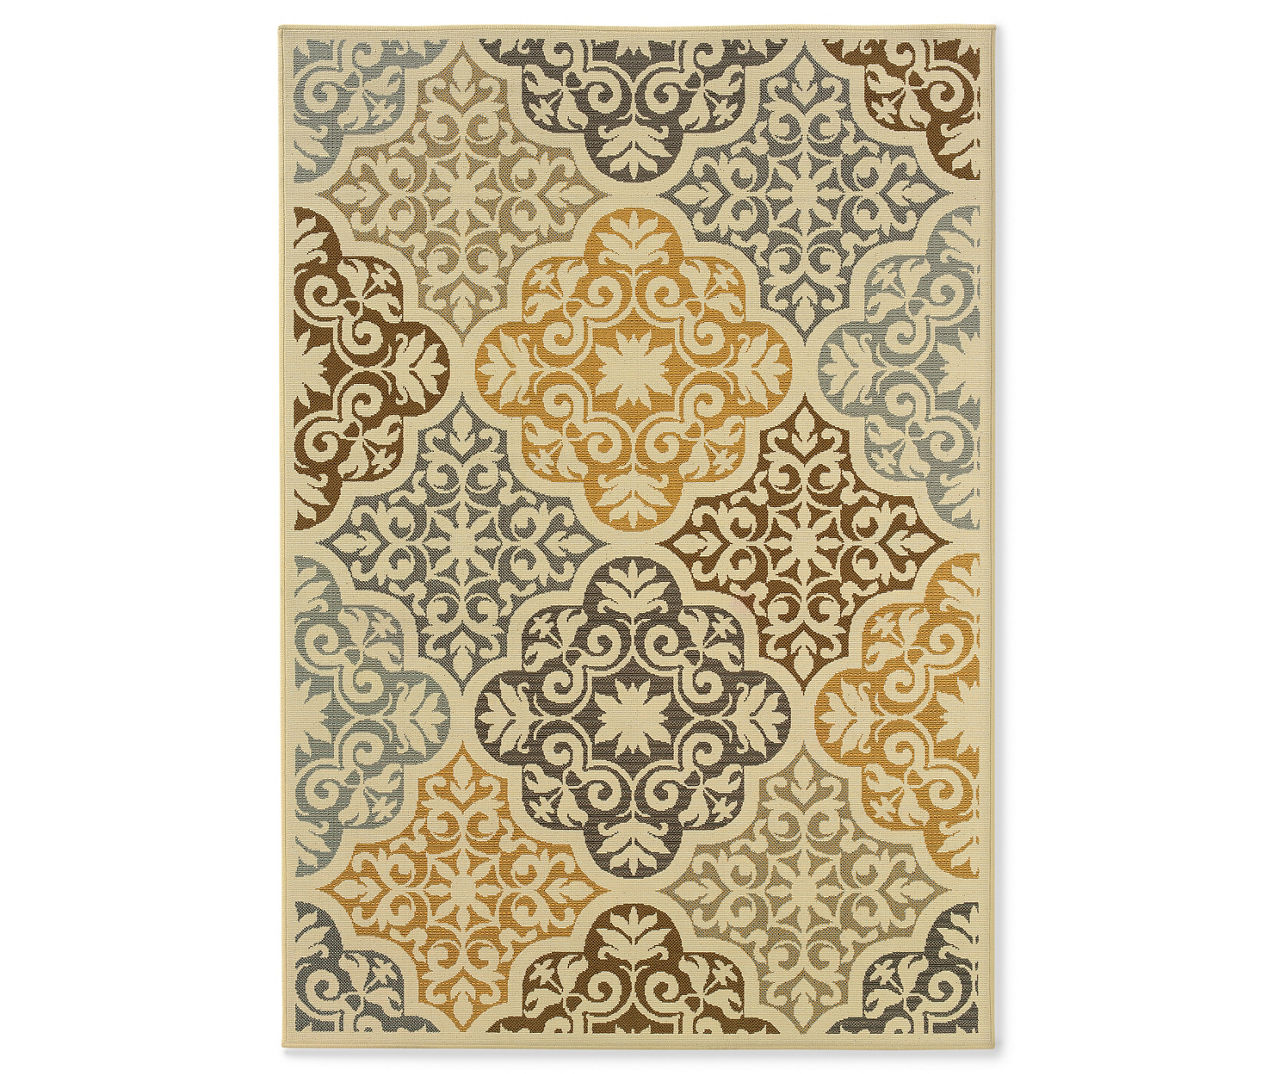 Gaines Warm White Outdoor Area Rug, (7'10" x 10'10")